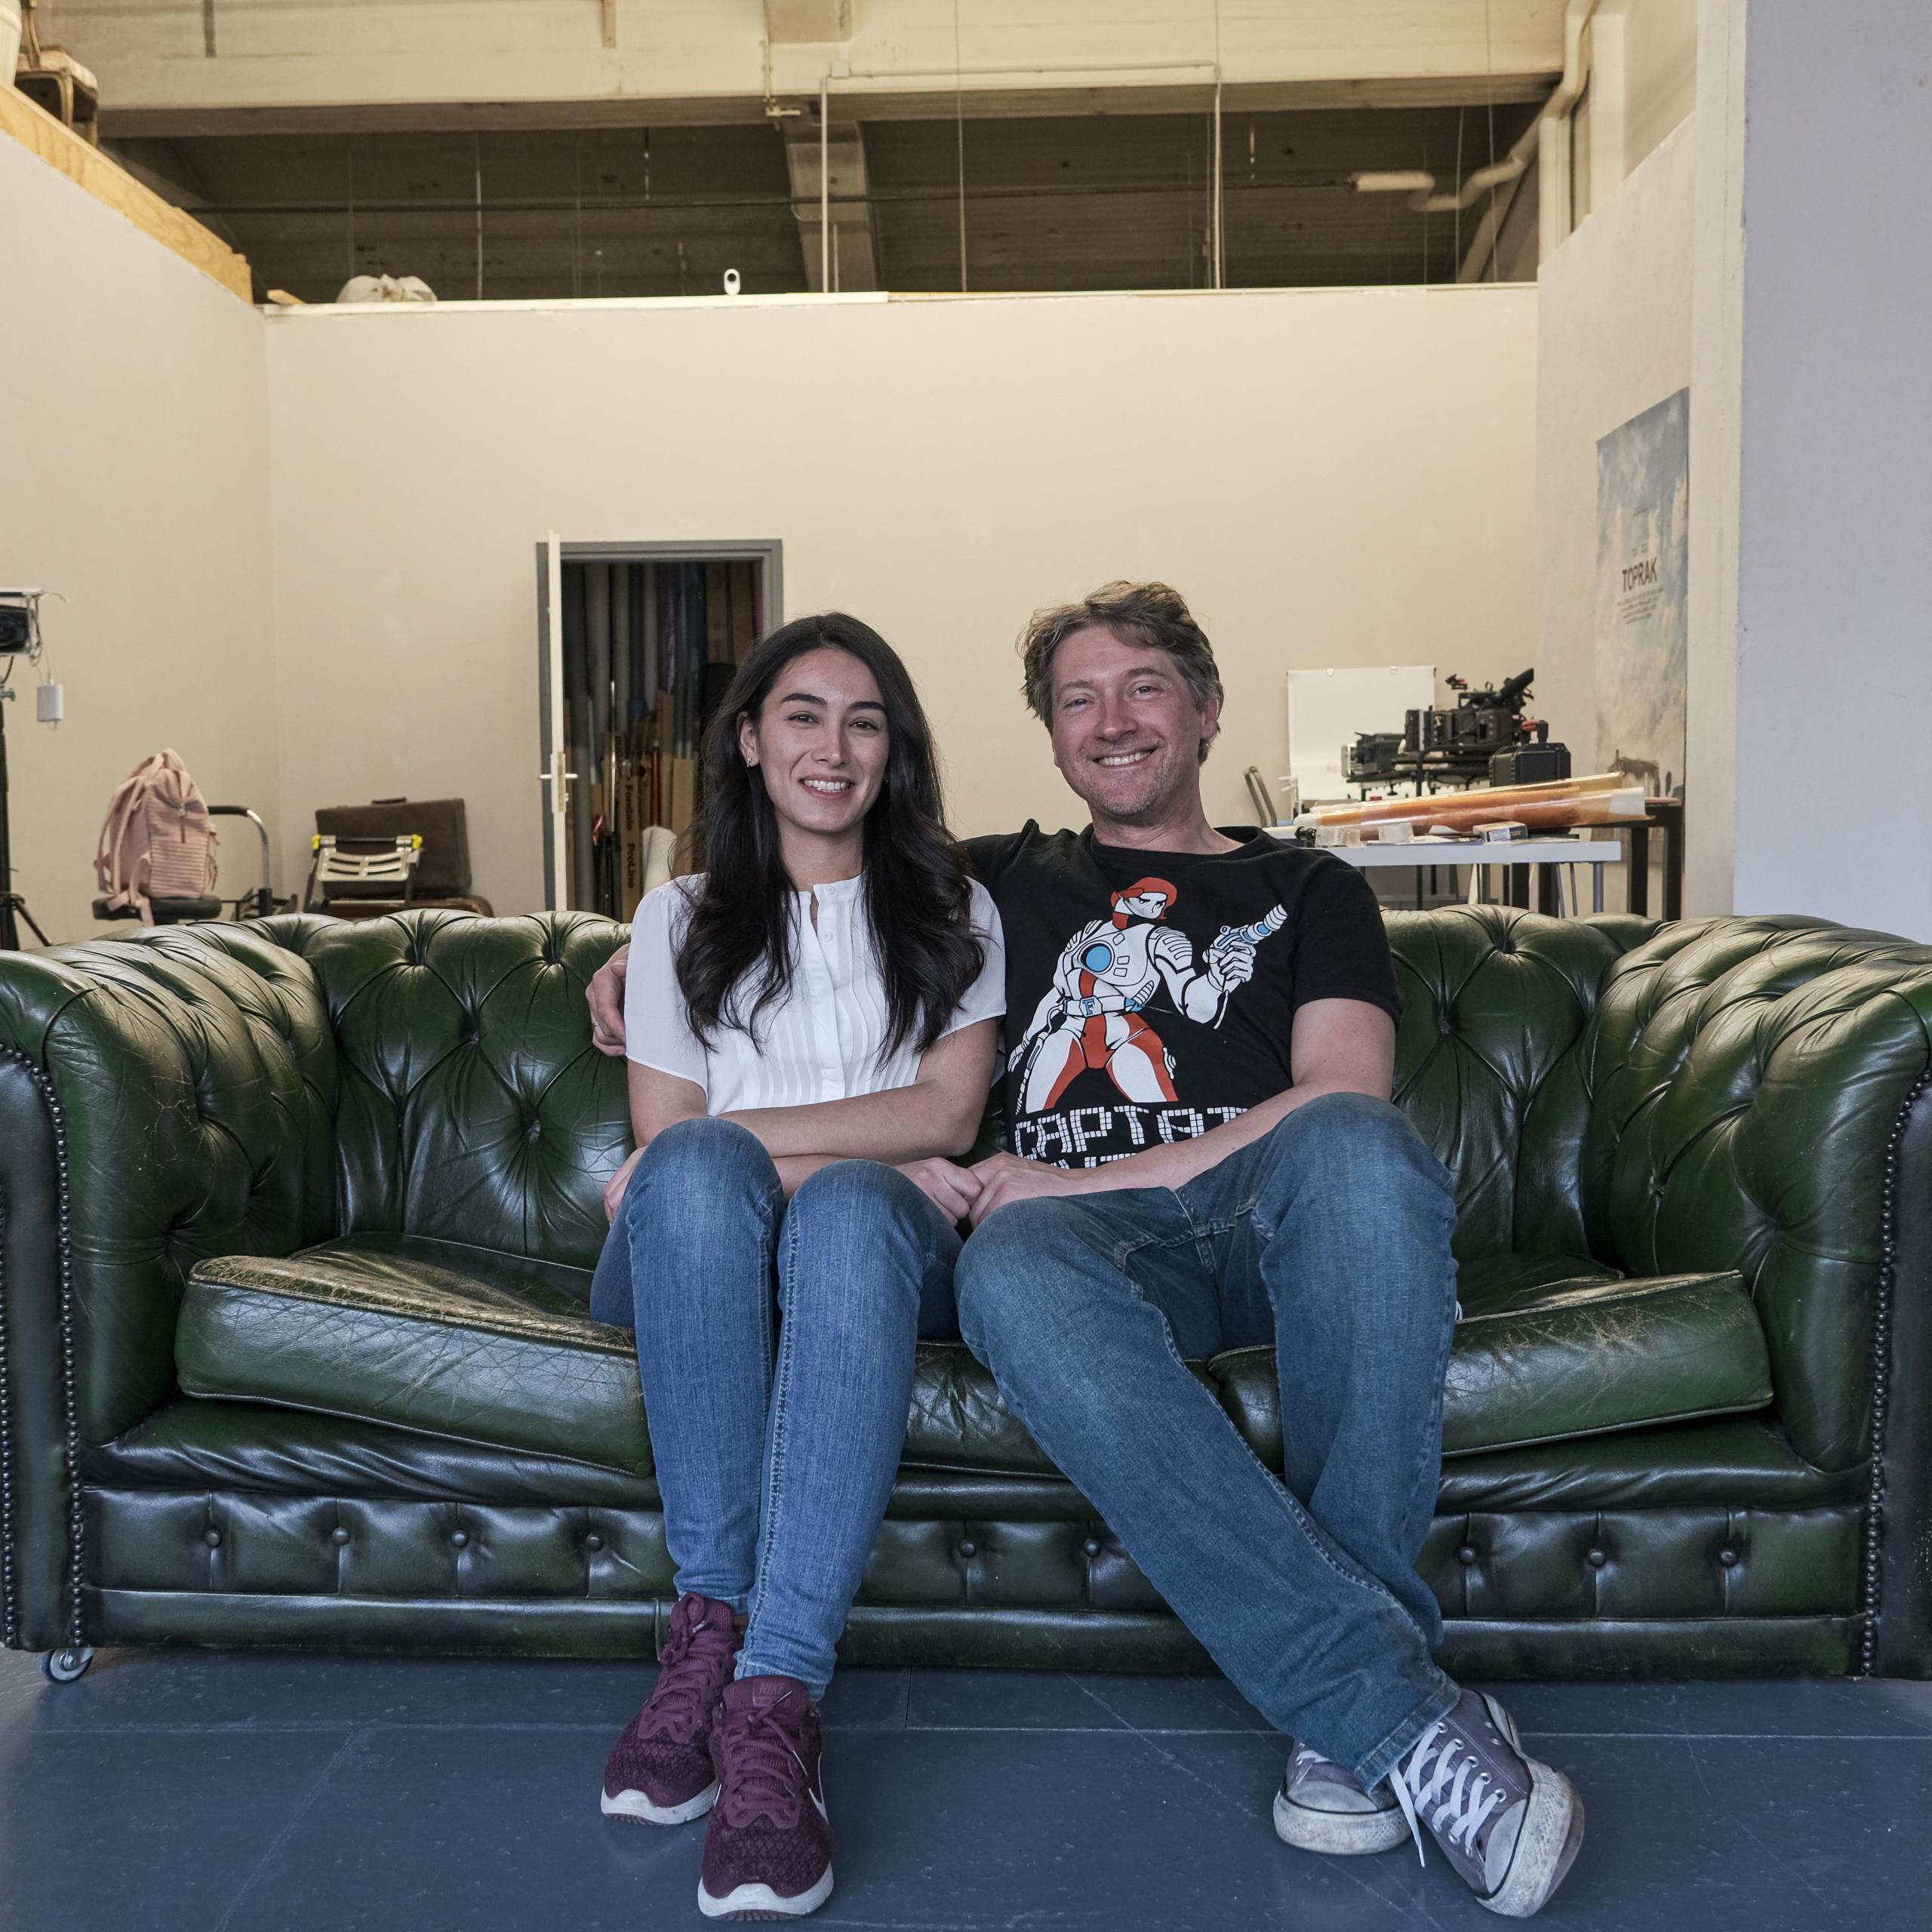 Filmmakers Sevgi and Chris Hirschhäuser sitting on a couch.
